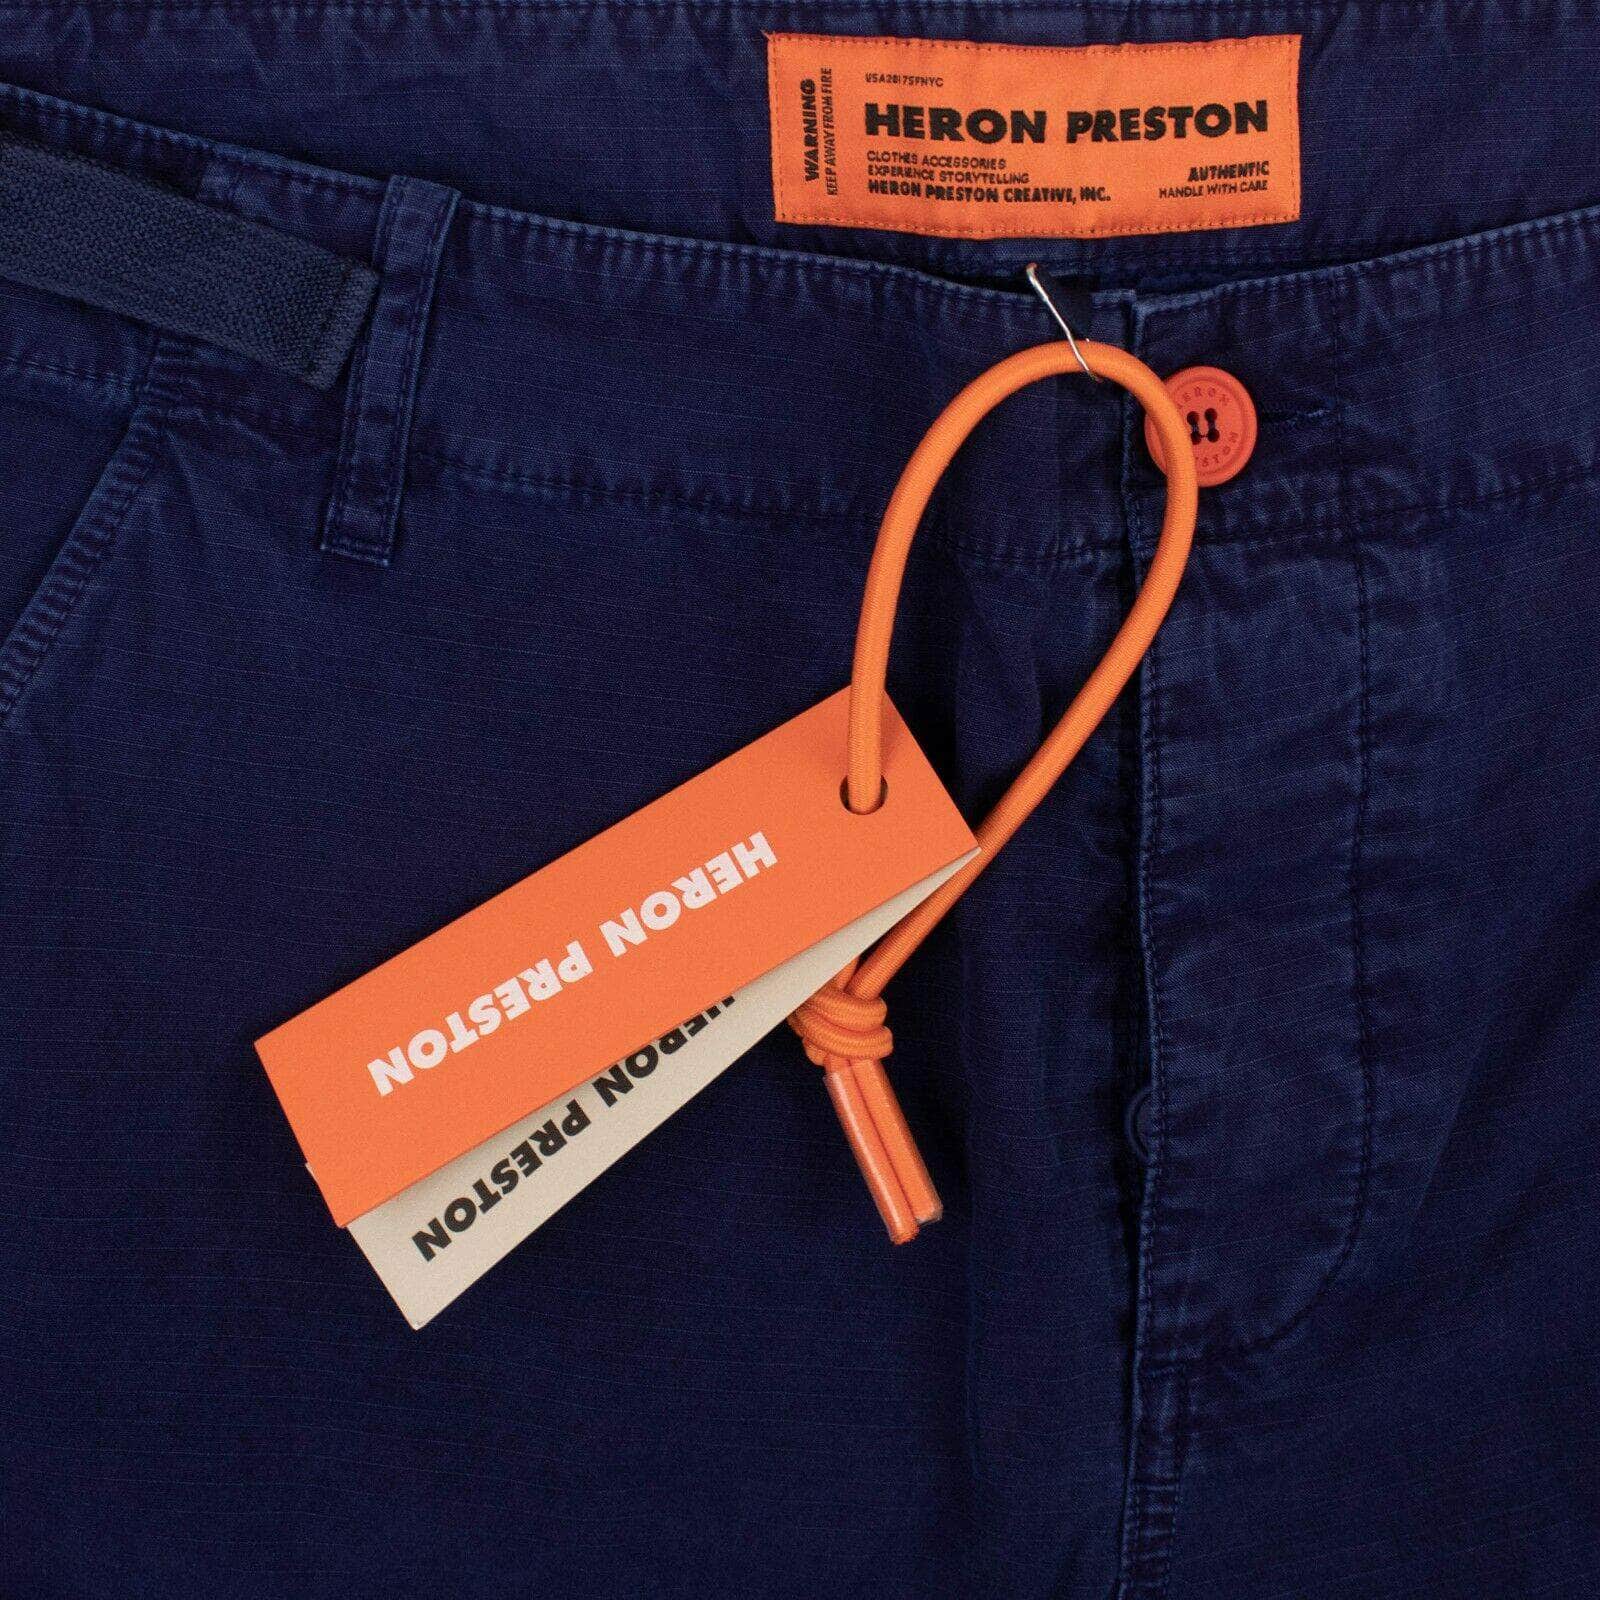 Heron Preston 500-750, channelenable-all, chicmi, couponcollection, gender-mens, heron-preston, main-clothing, mens-cargo-pants, size-l, size-m, size-s Blue Cargo Pants